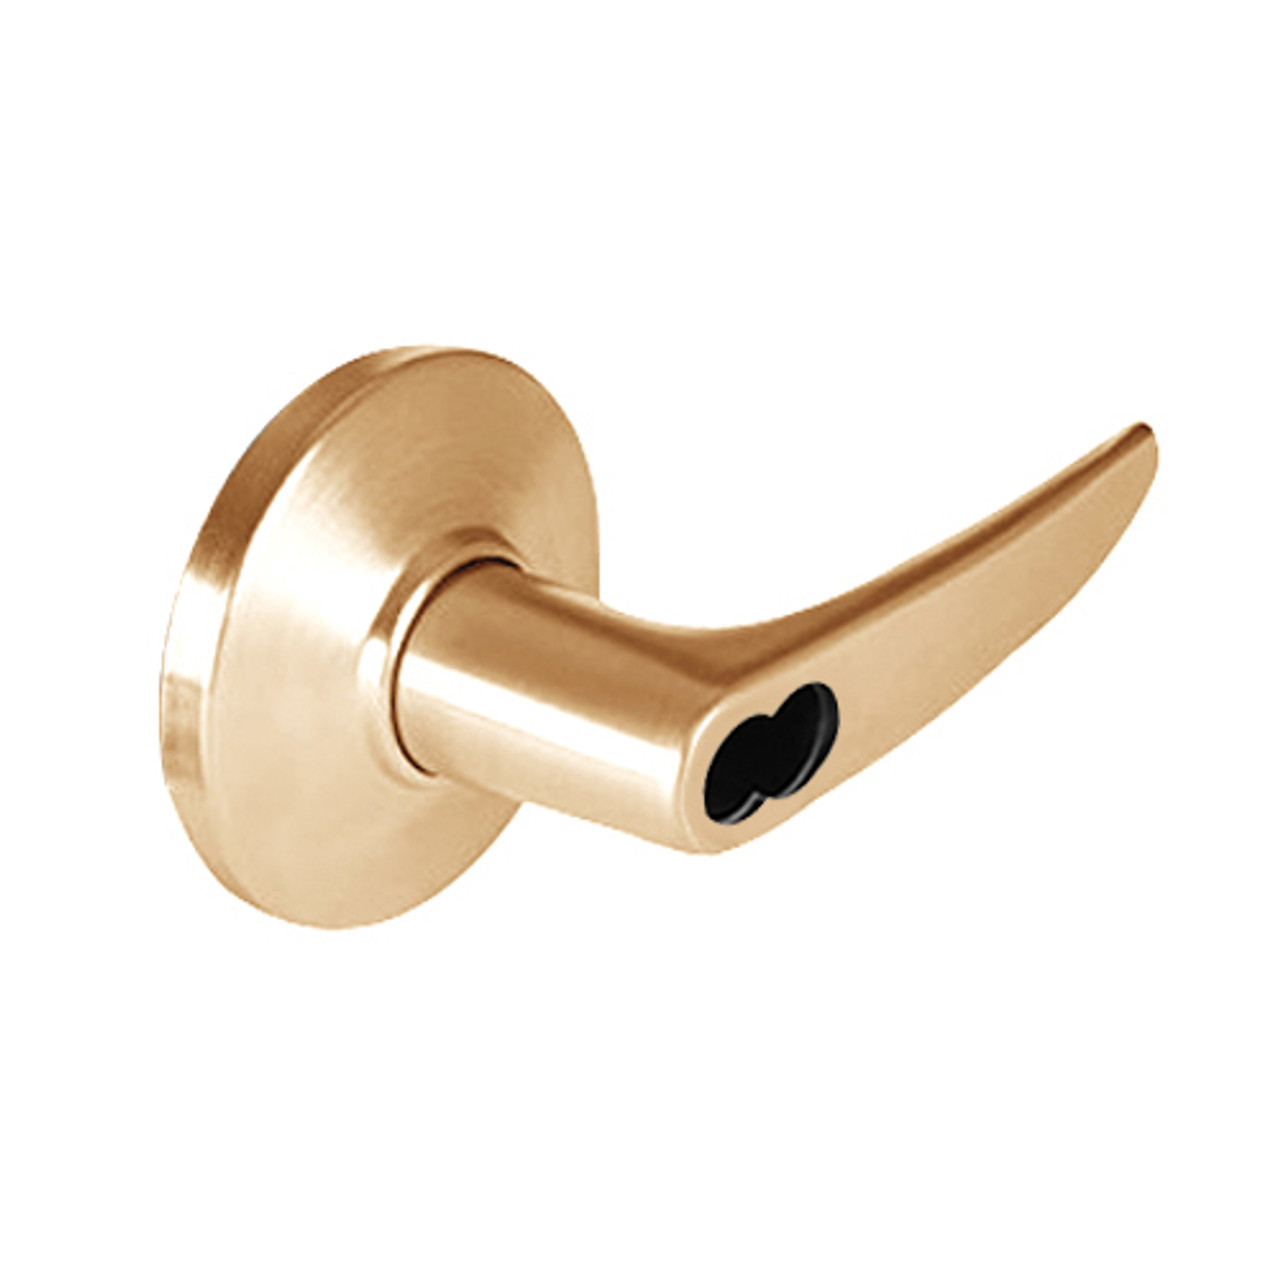 9K37RD16DSTK611 Best 9K Series Special Function Cylindrical Lever Locks with Curved without Return Lever Design Accept 7 Pin Best Core in Bright Bronze